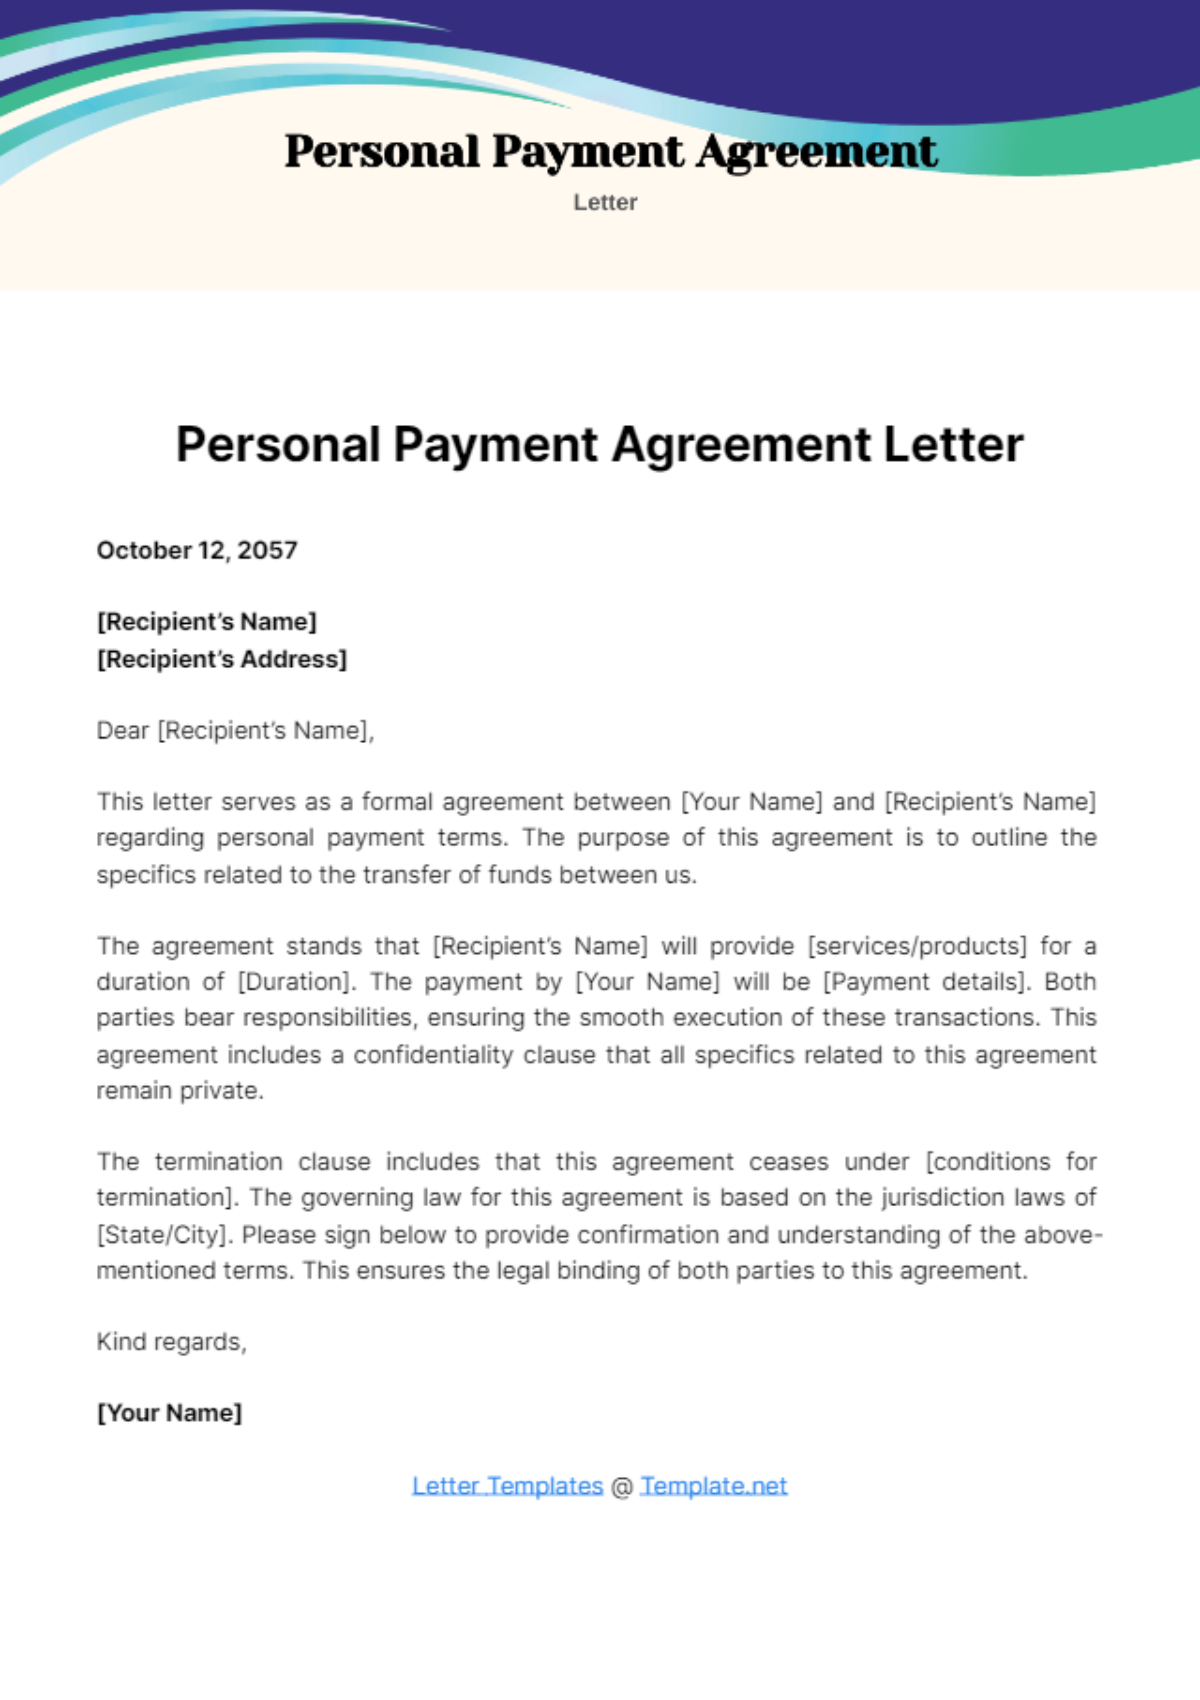 Free Personal Payment Agreement Letter Template